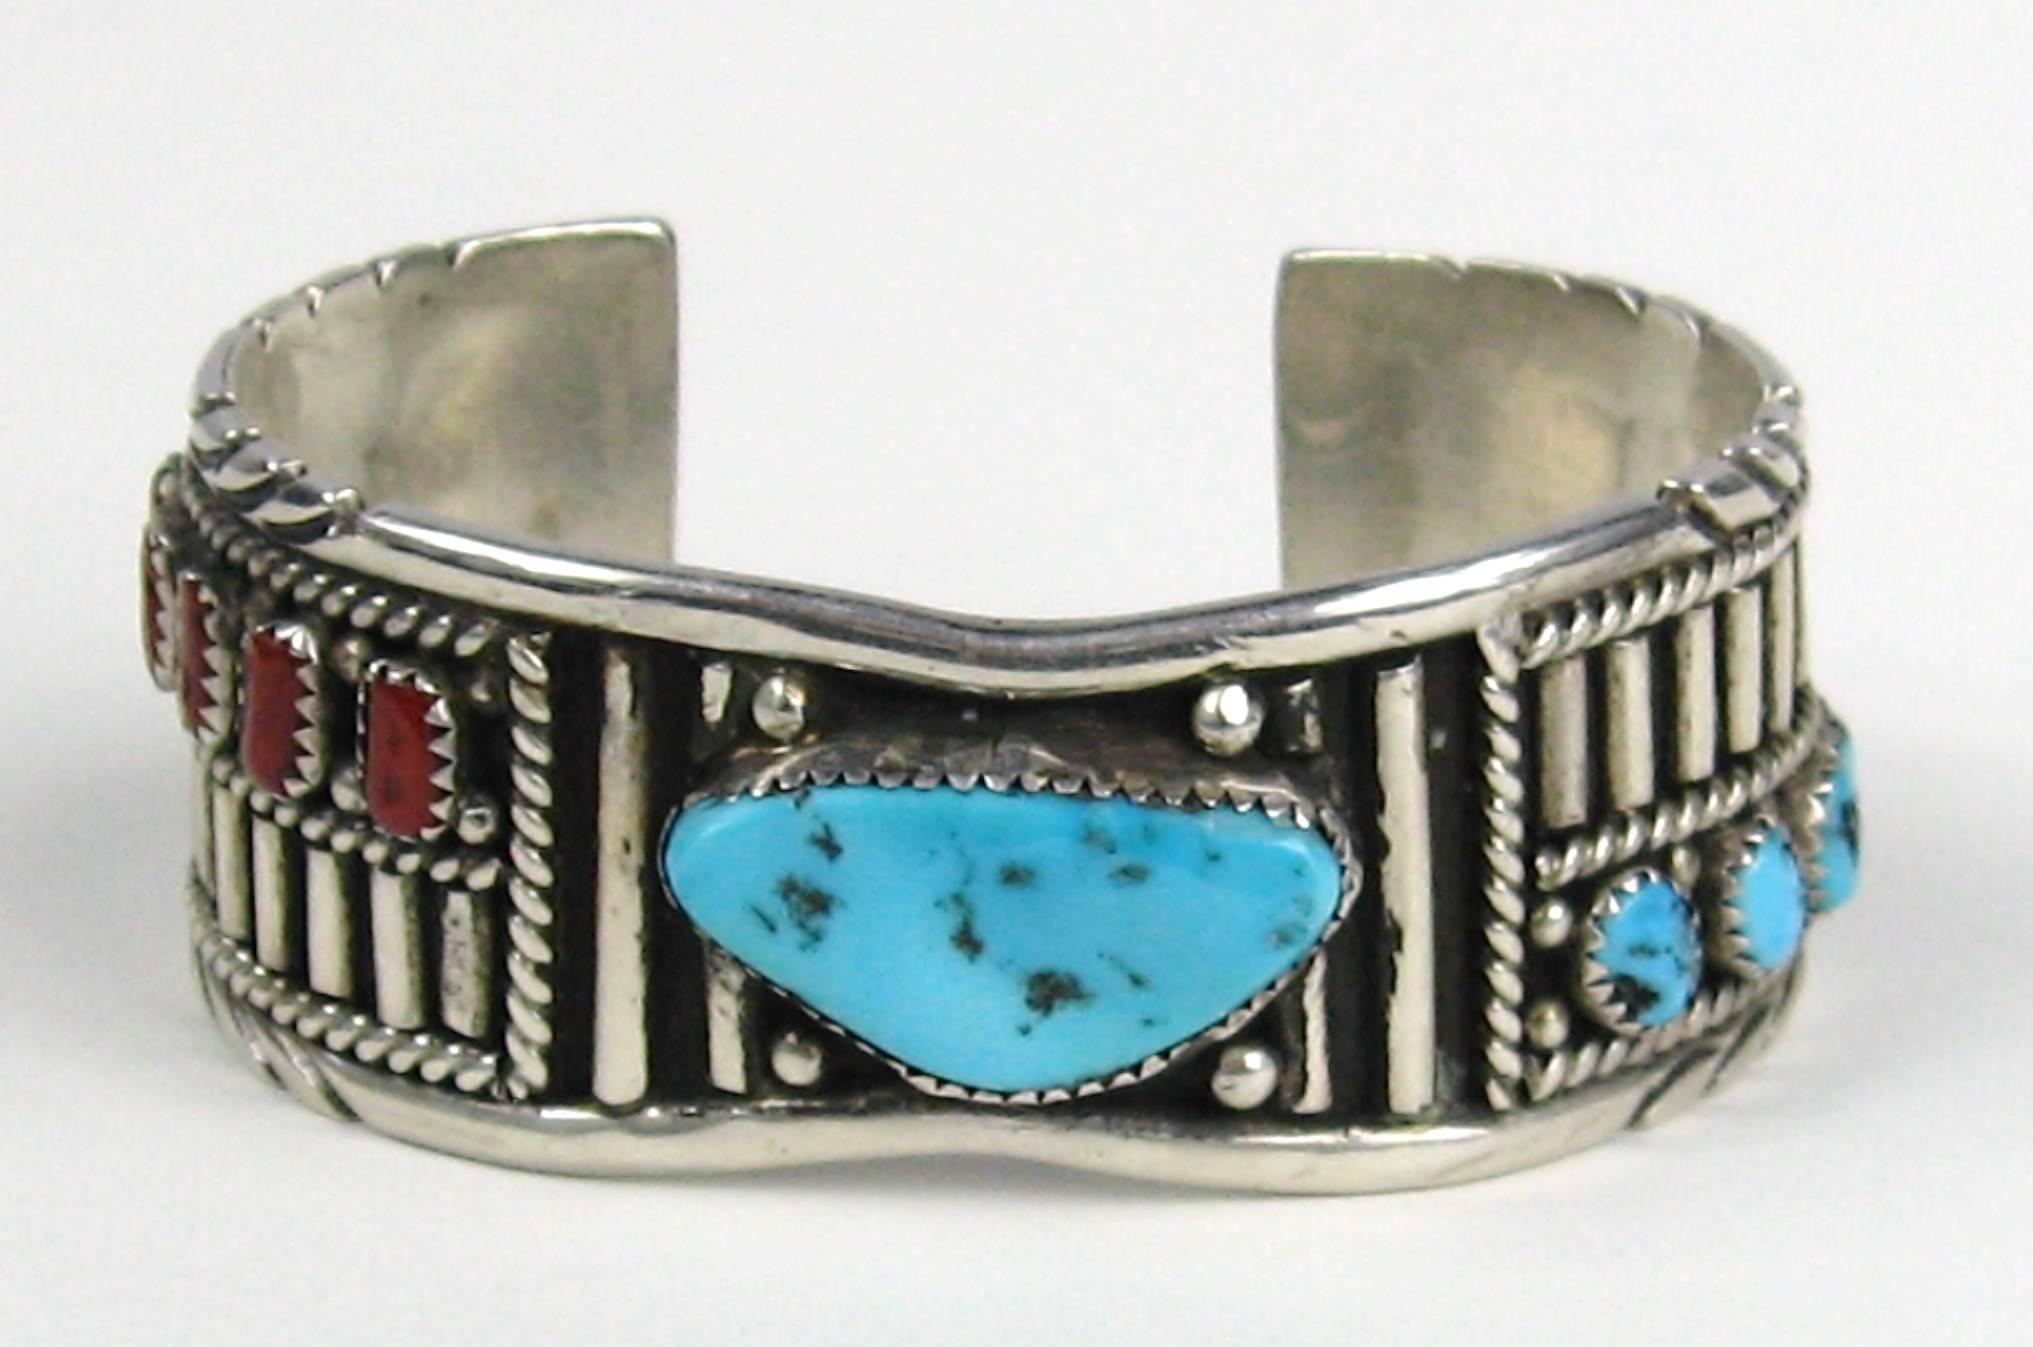 Navajo Old Pawn Sterling silver Cuff Mirrored image on both sides, one is bezel coral the other is bezel Turquoise. Measures .83 in the center and graduates up to .98 in, Will fit a 6.5 to 7 in wrist nicely. This is out of a massive collection of